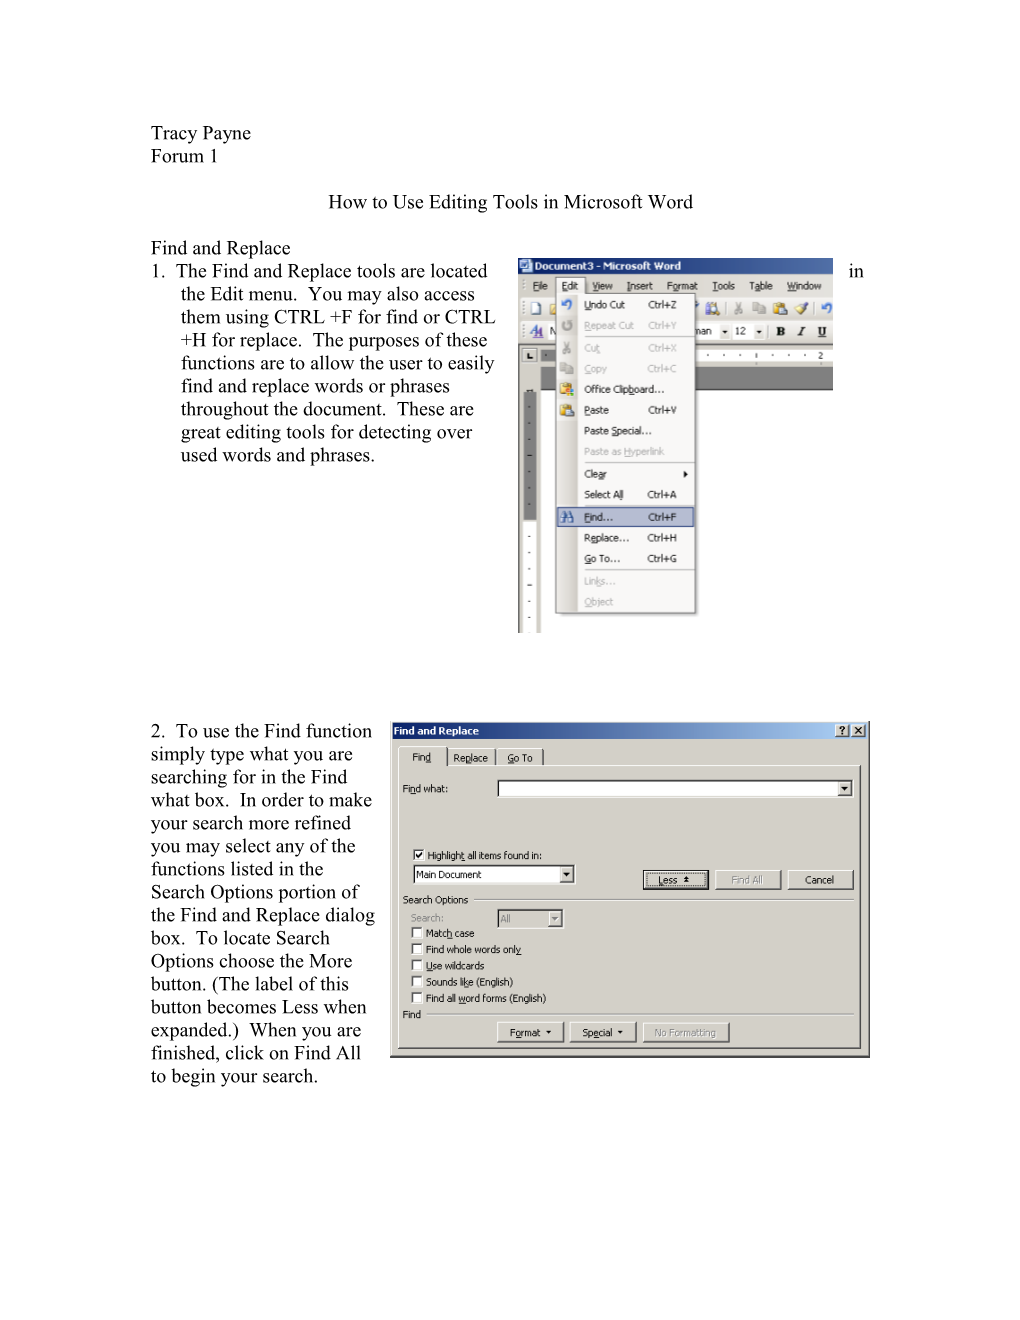 How to Use Editing Tools in Microsoft Word